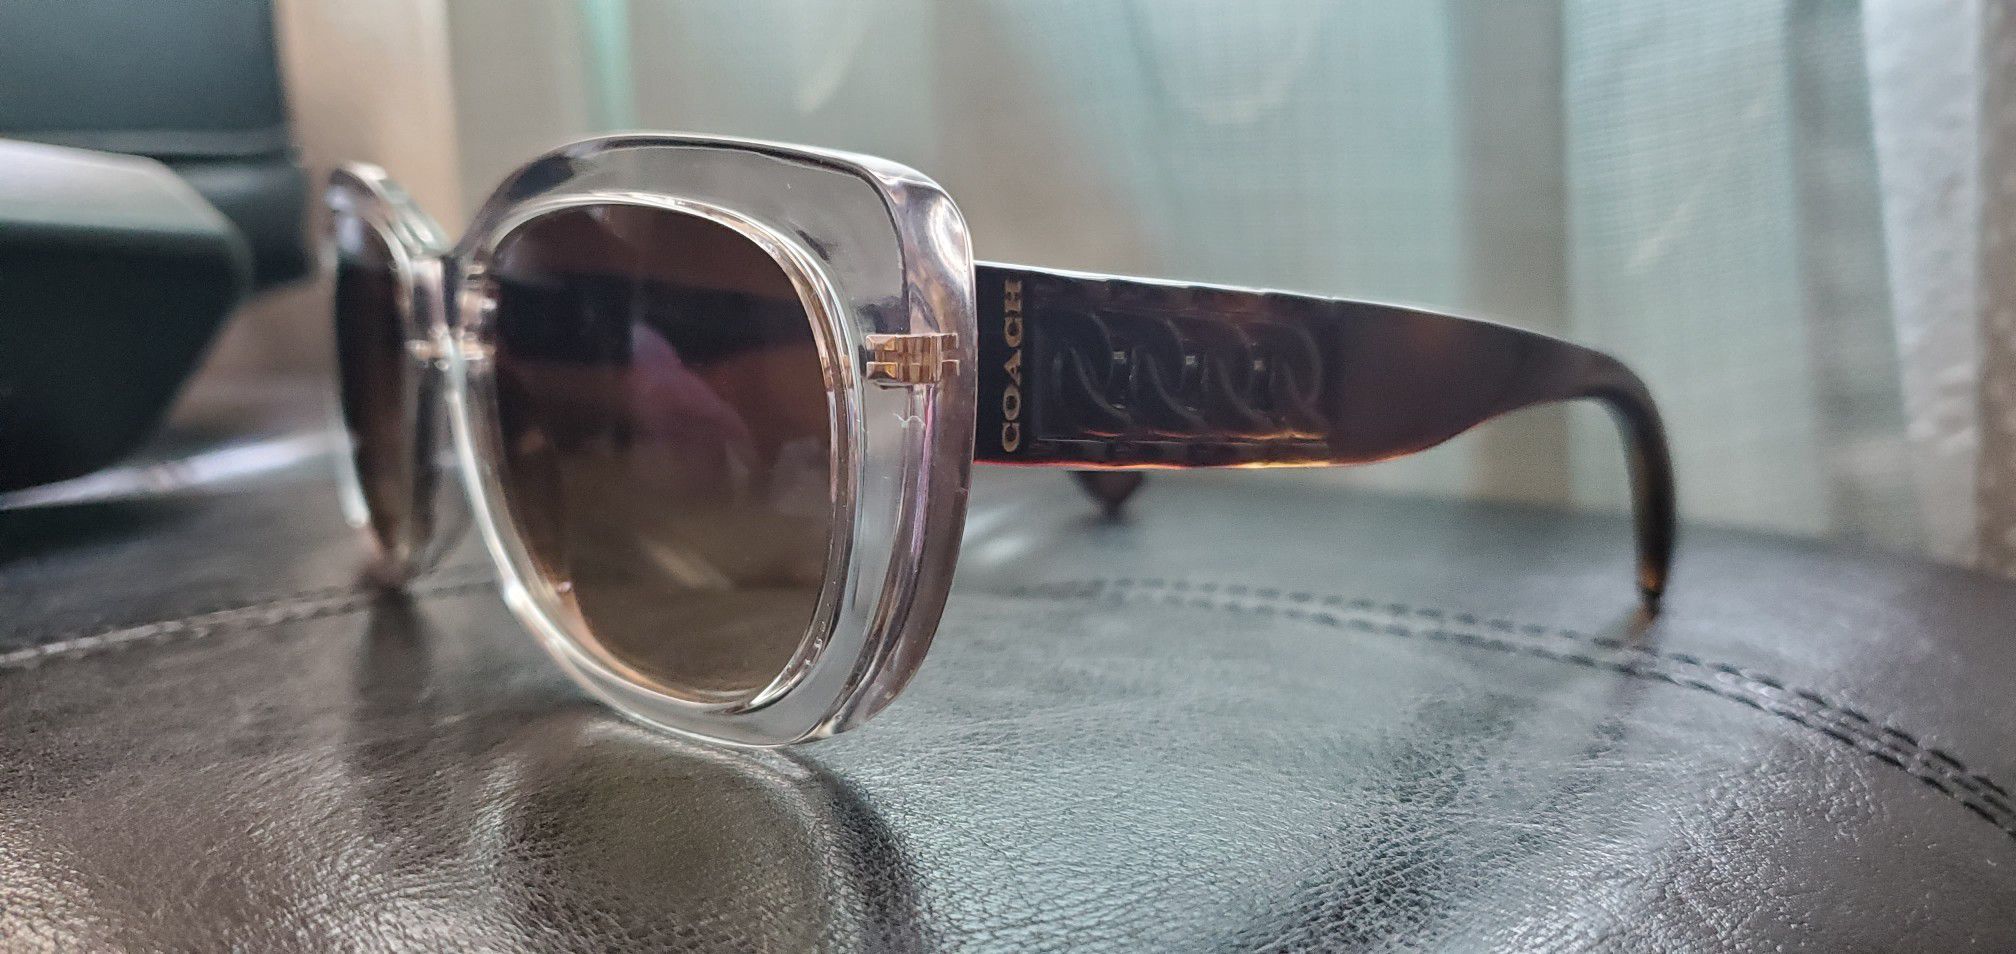 Coach brand barely used sunglasses